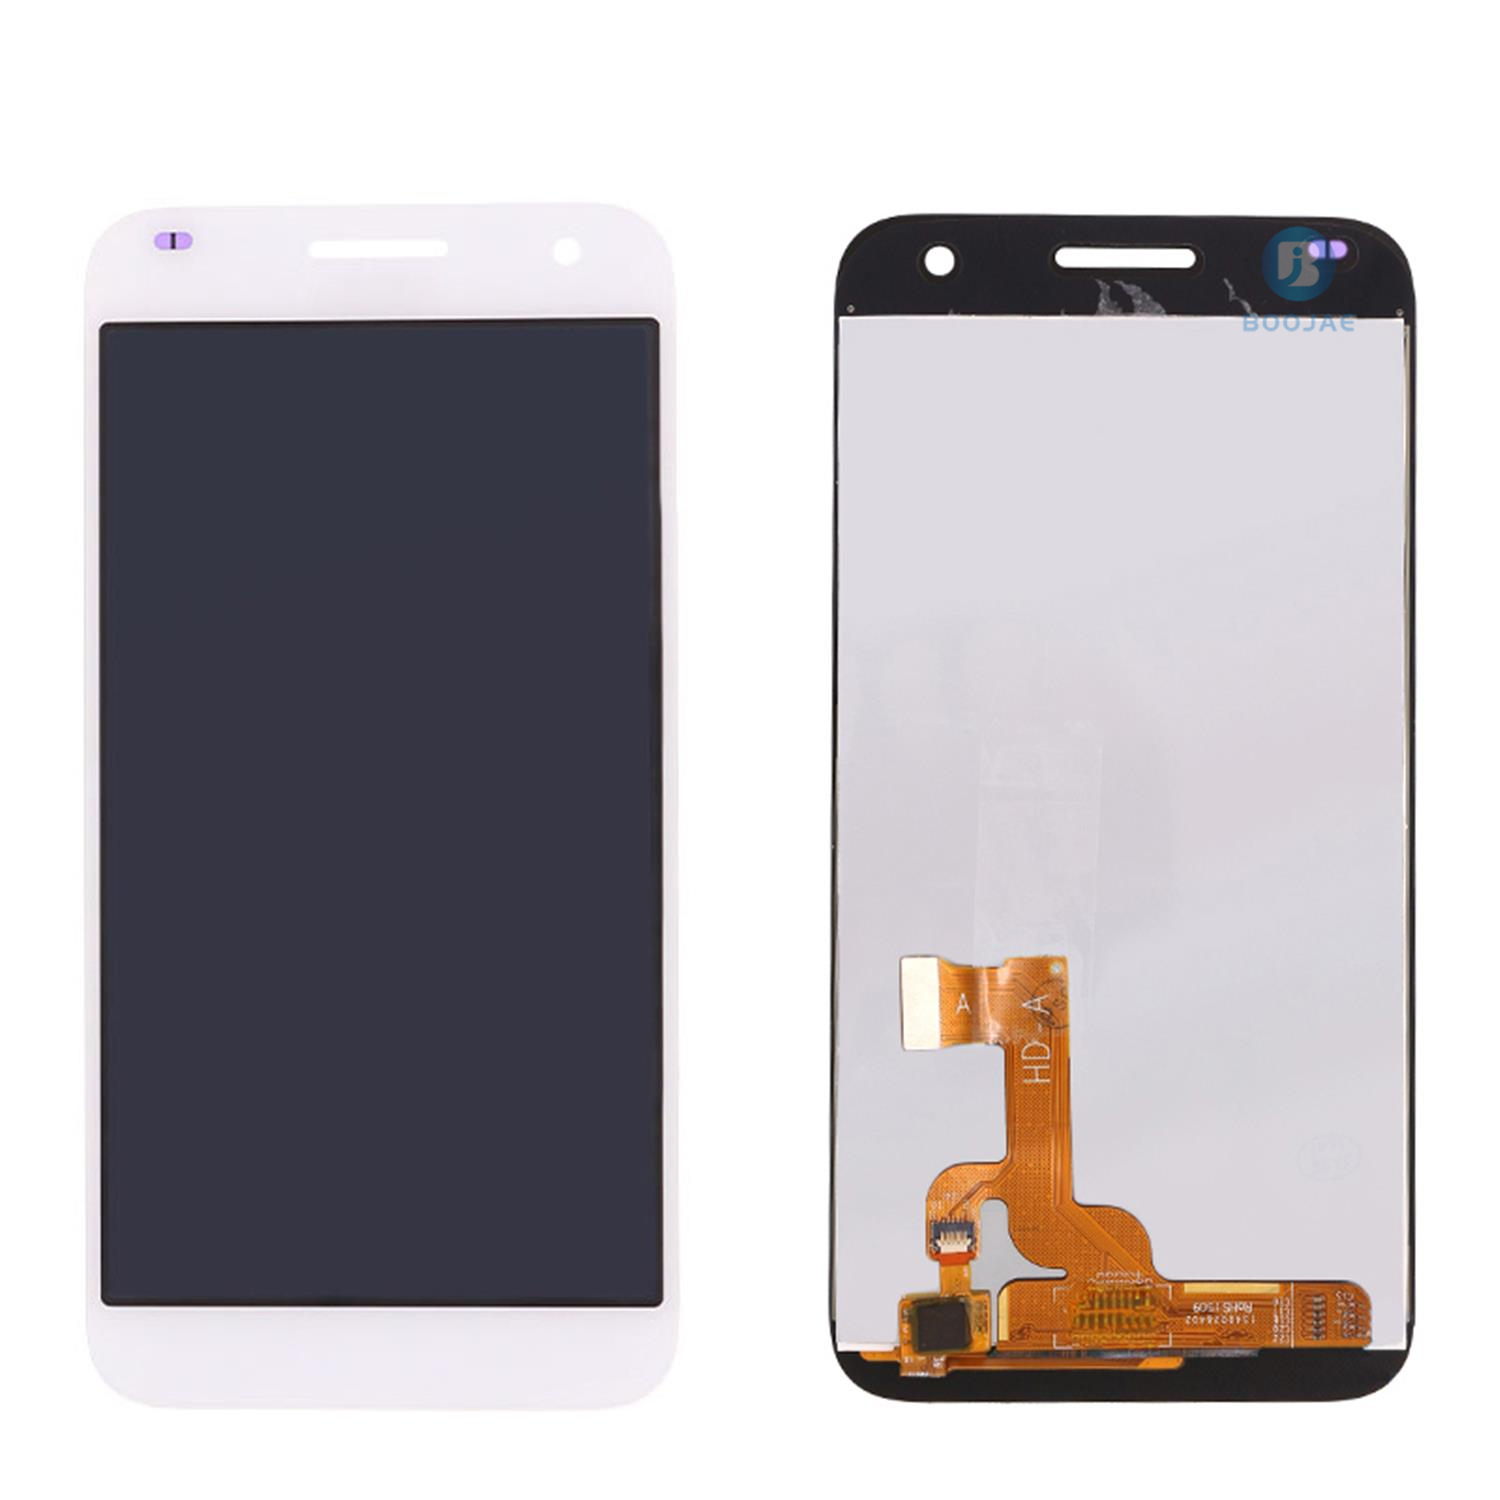 Huawei Ascend G7 LCD Screen Display and Touch Panel Digitizer Assembly Replacement